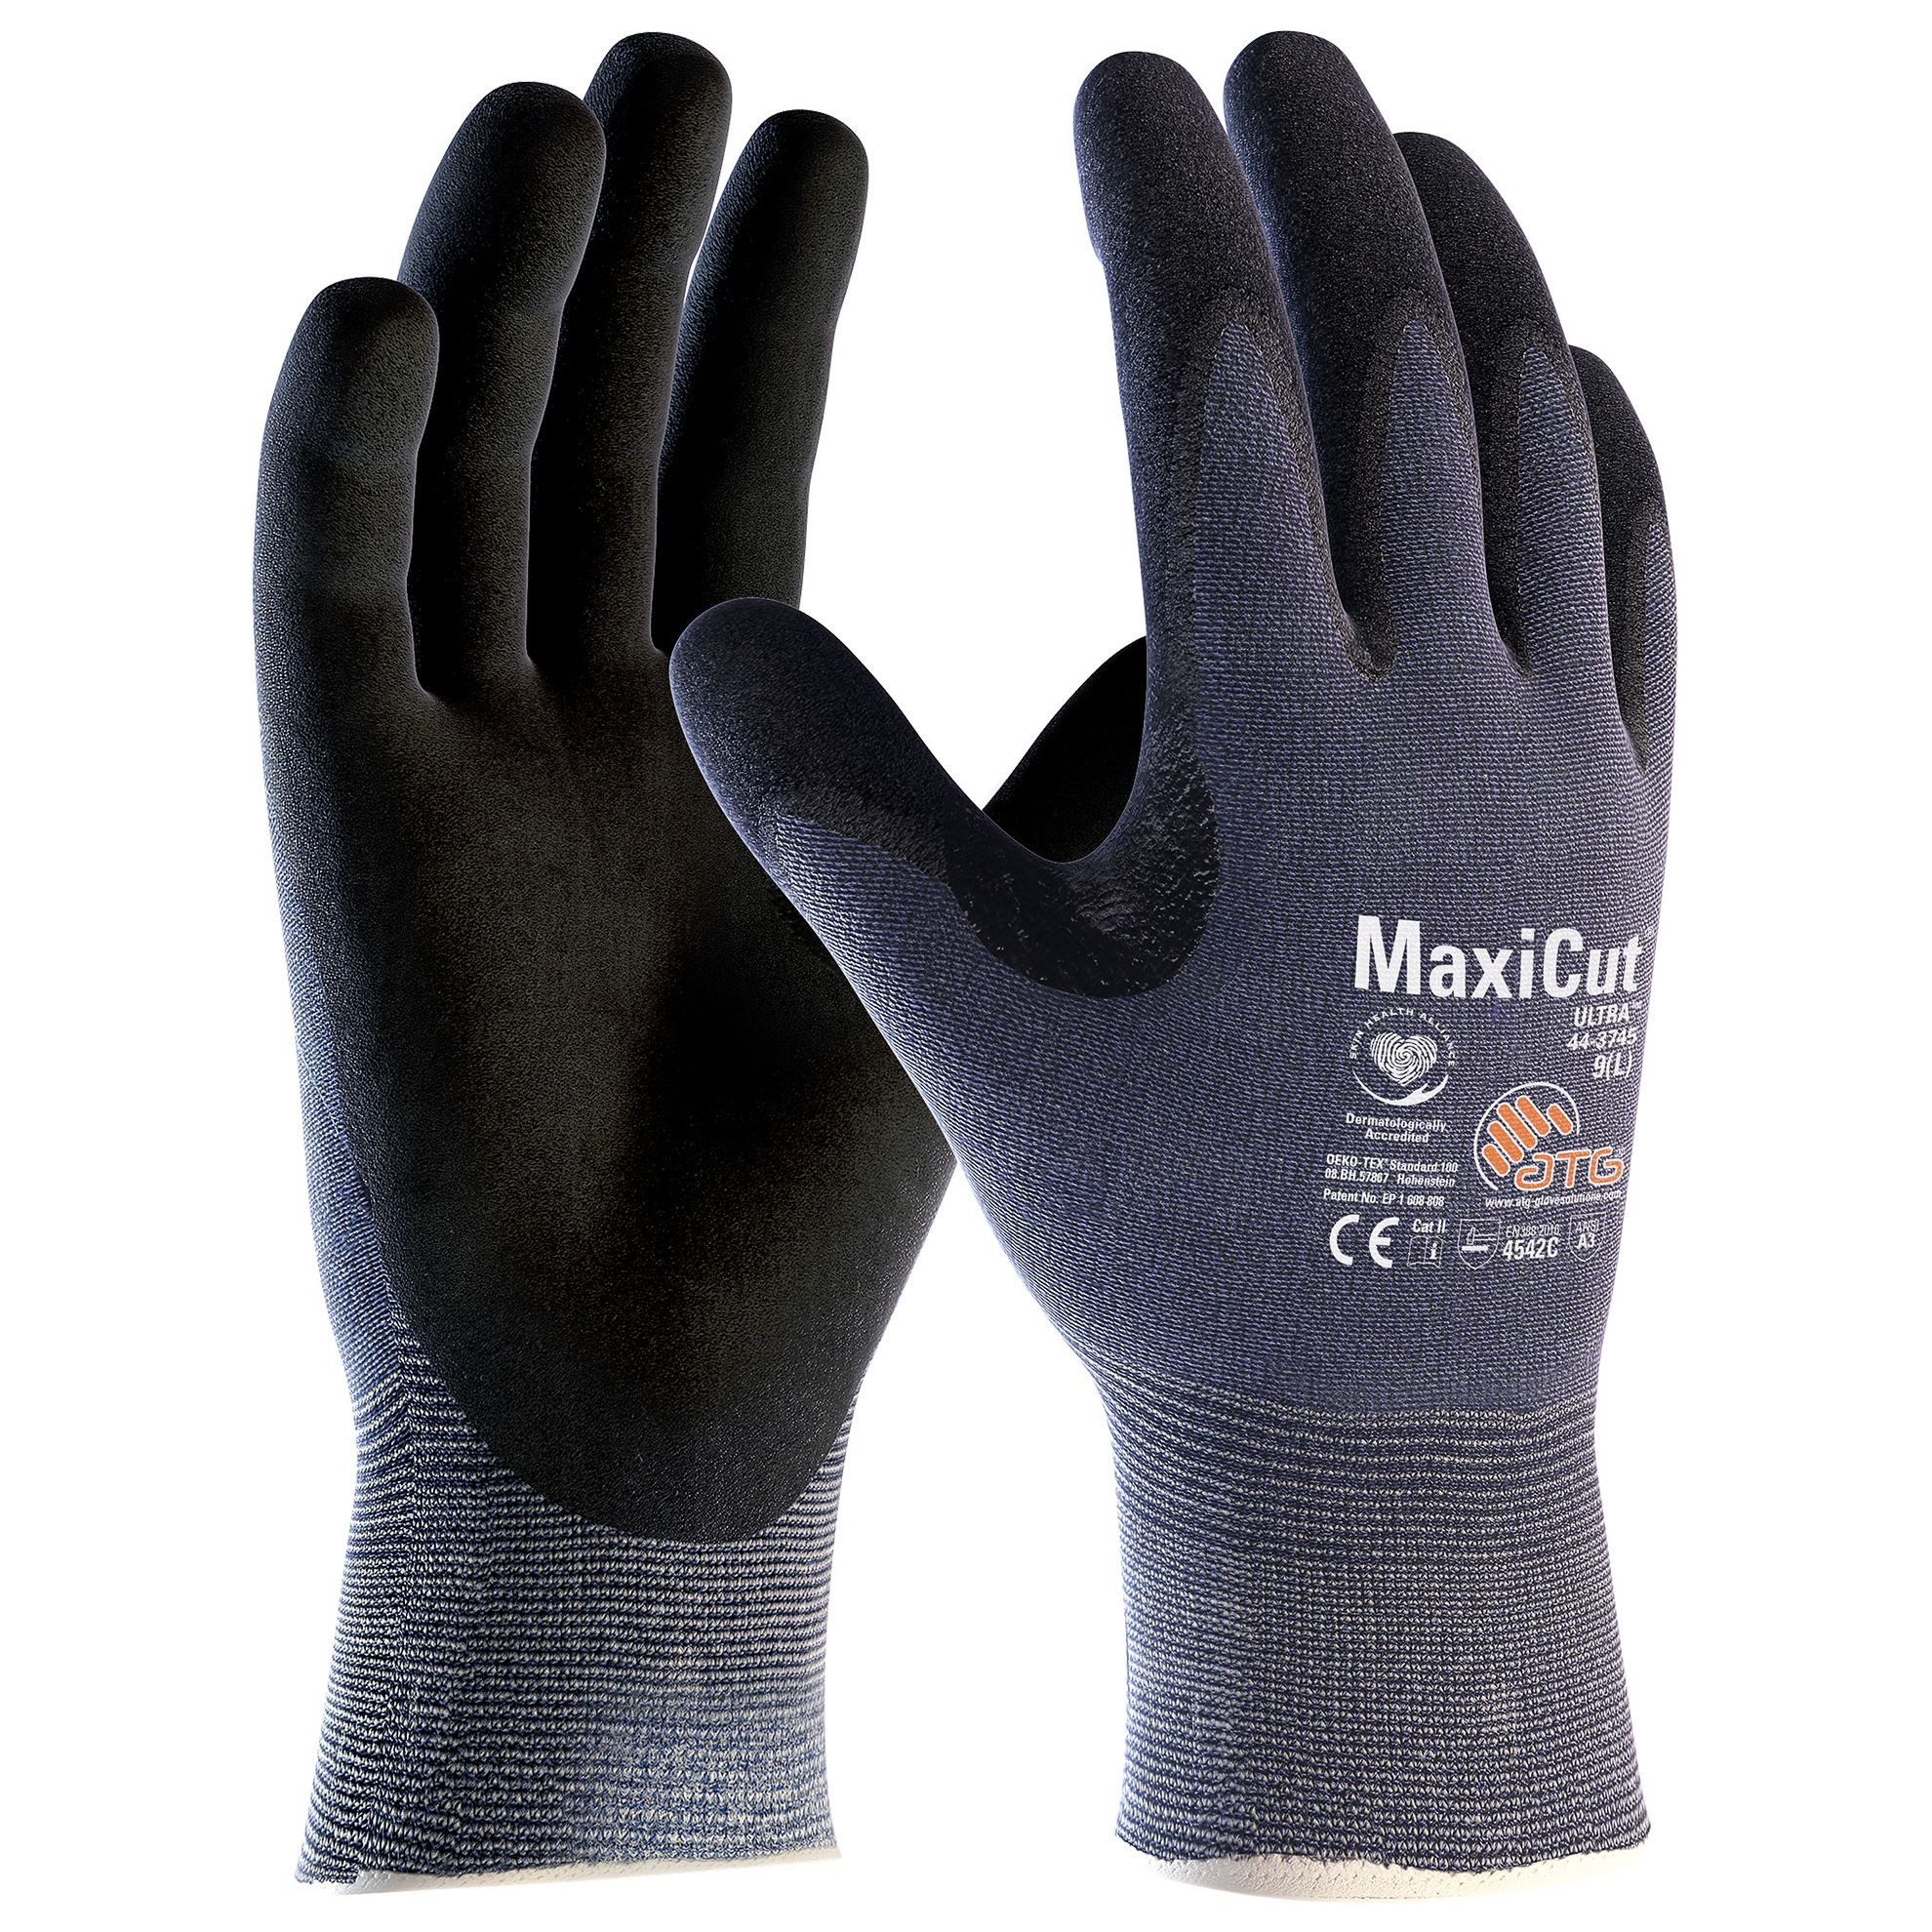 MaxiCut Ultra Gloves 44-3745 (12 Pairs) - SafetyGloves.co.uk